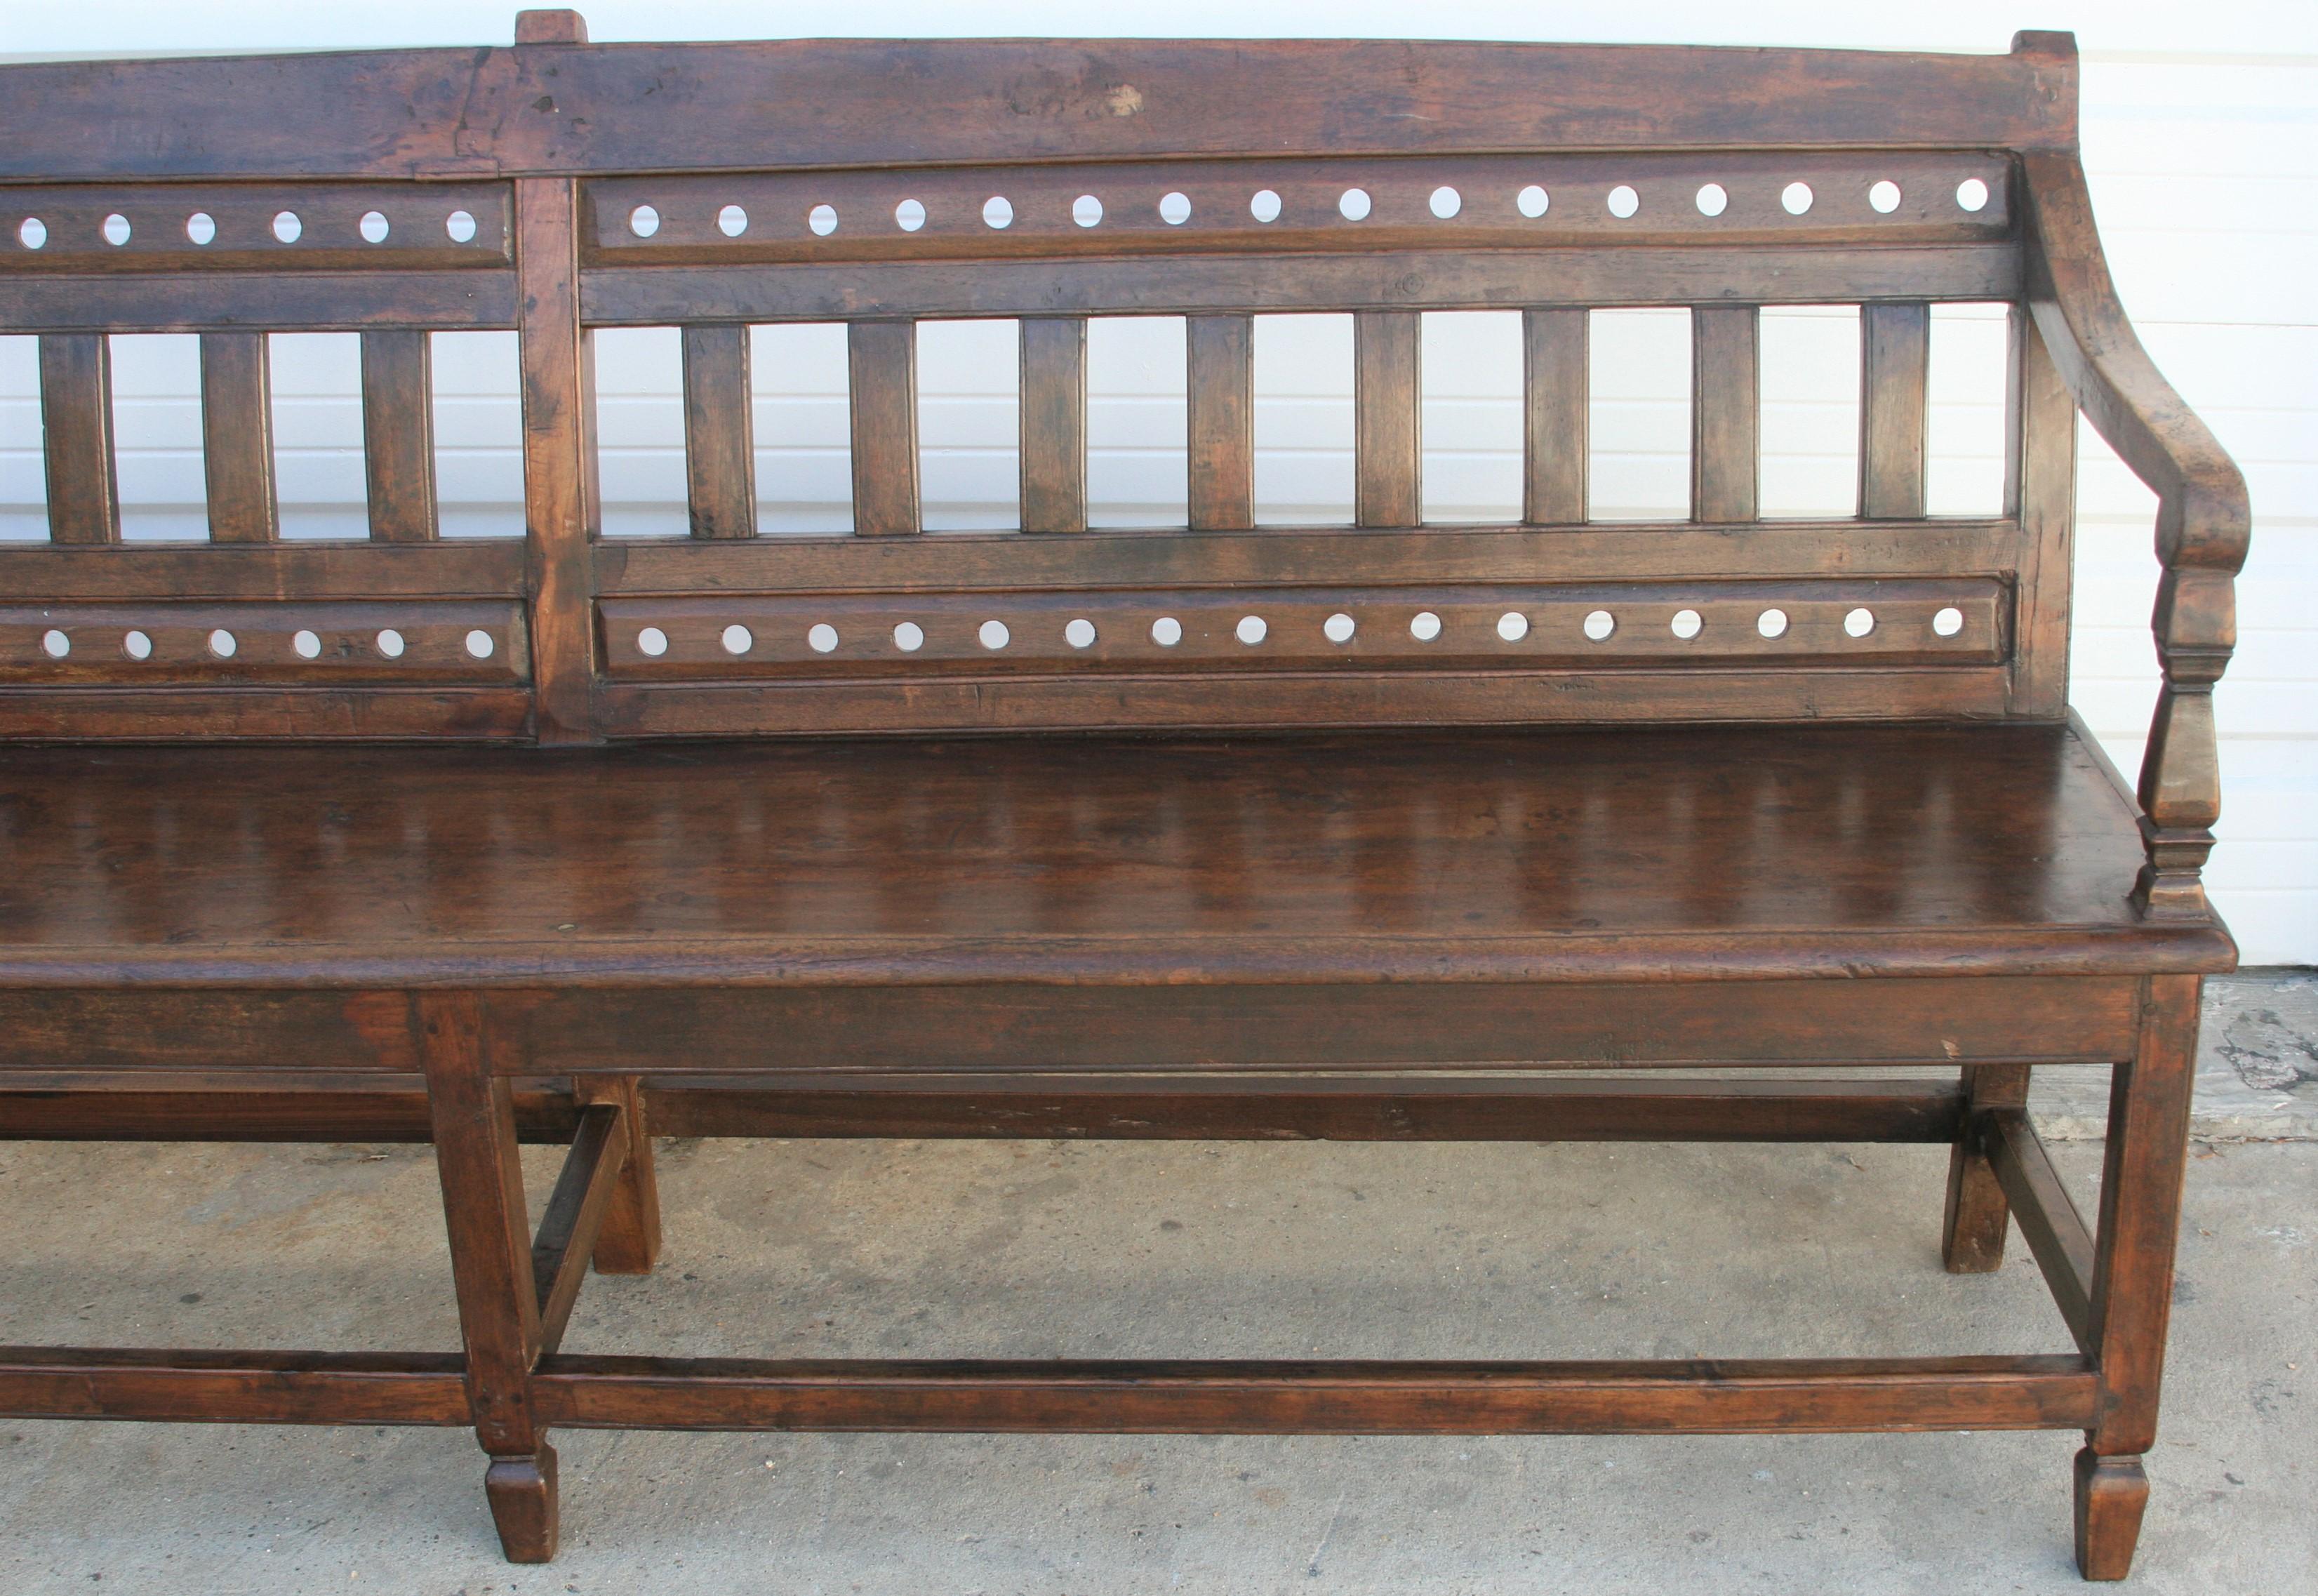 Anglo Raj Classic Example of a Colonial Era Bench from the British Empire For Sale